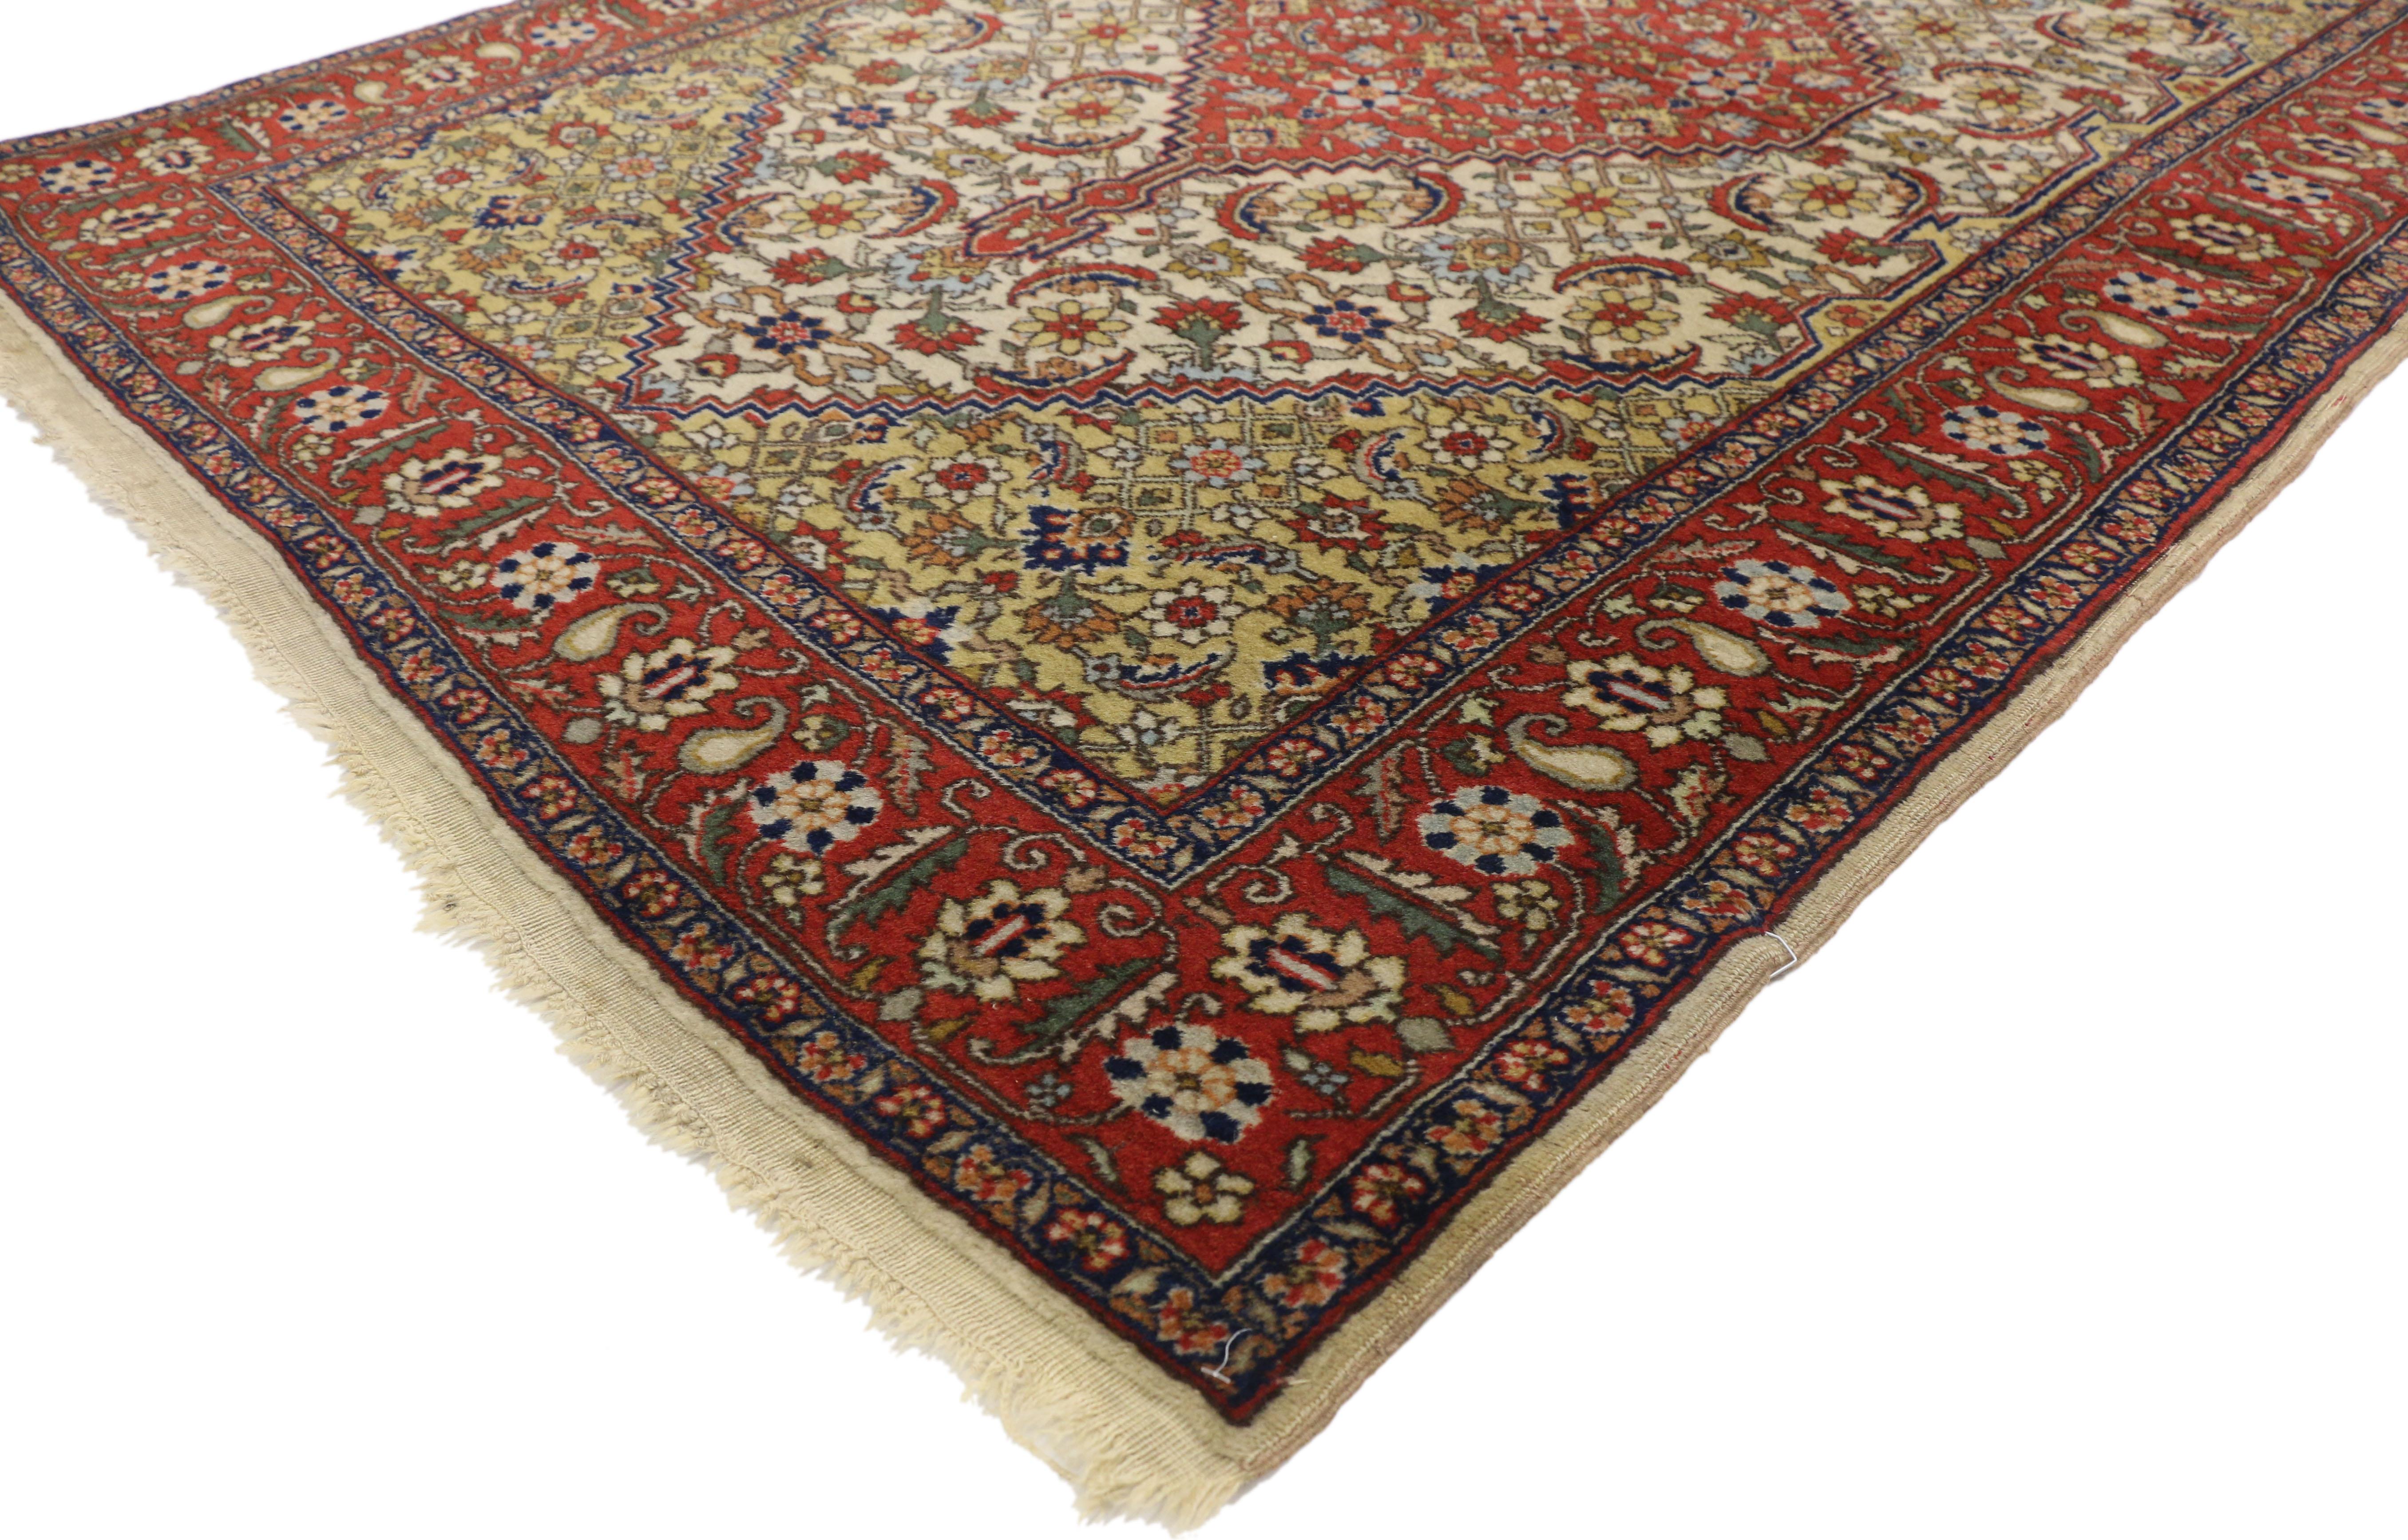 74300, vintage Romanian accent rug with Herati Mahi fish design. This hand knotted wool vintage Romanian accent rug features a lovely all-over geometric pattern composed of Herati motifs. The Herati motif consists of curving sickle leaves